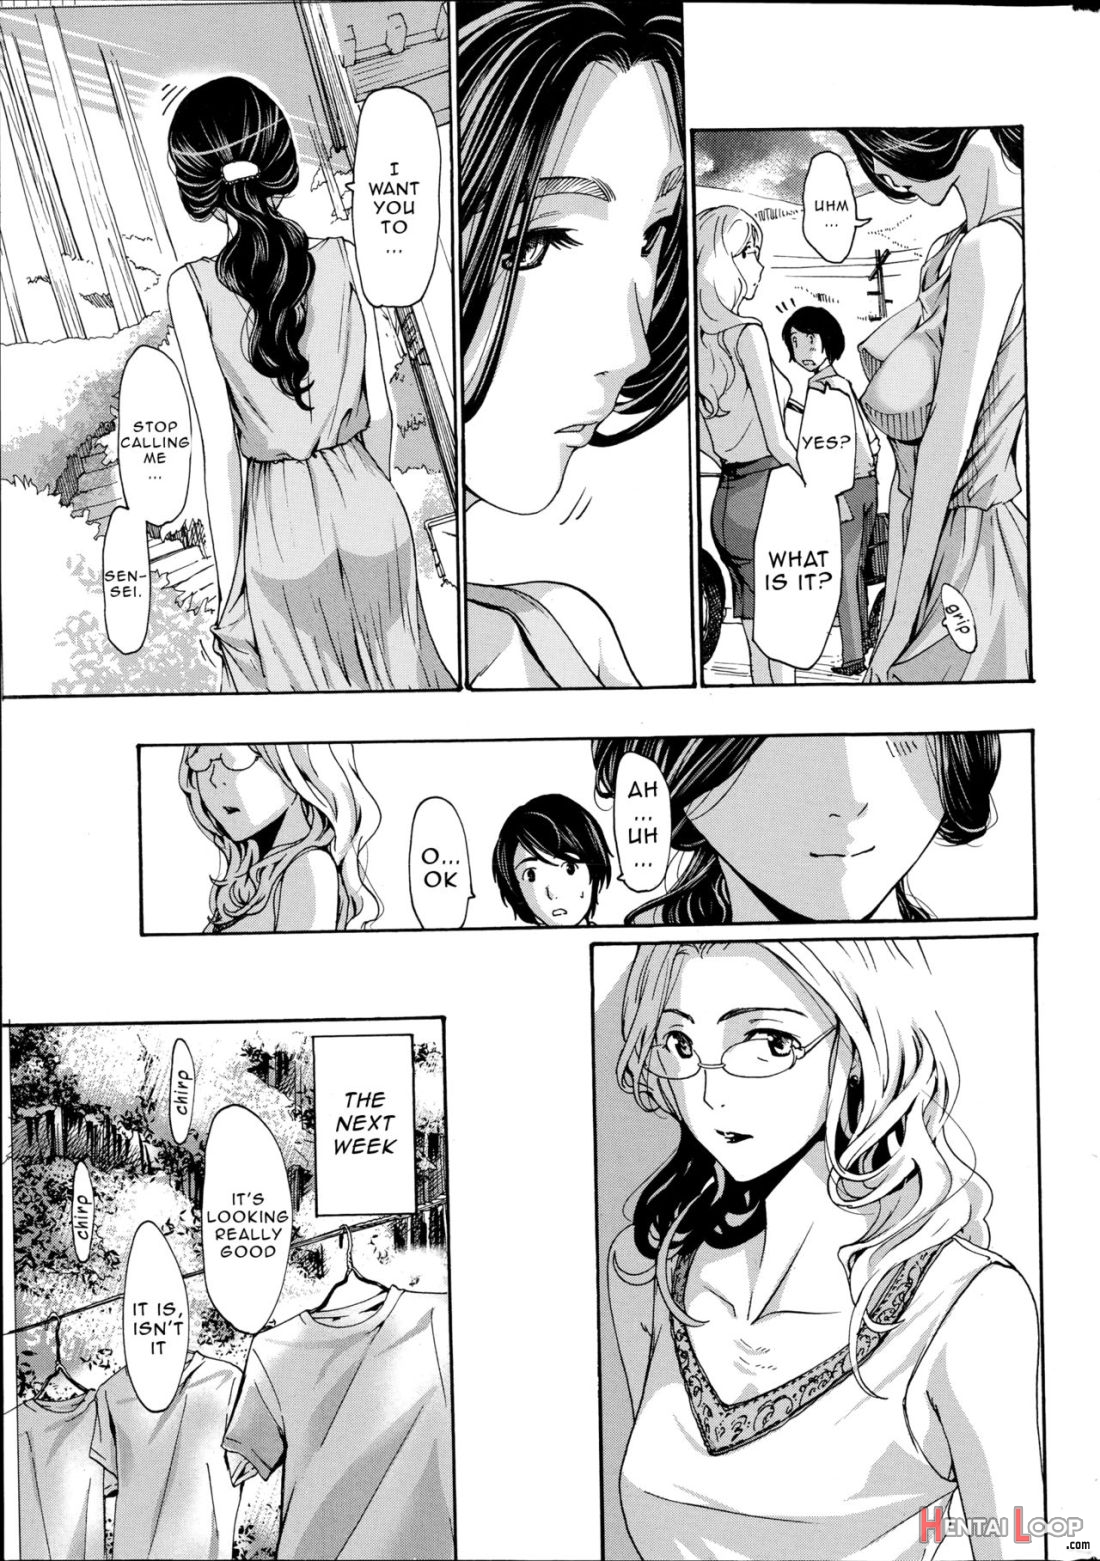 Orihime page 5